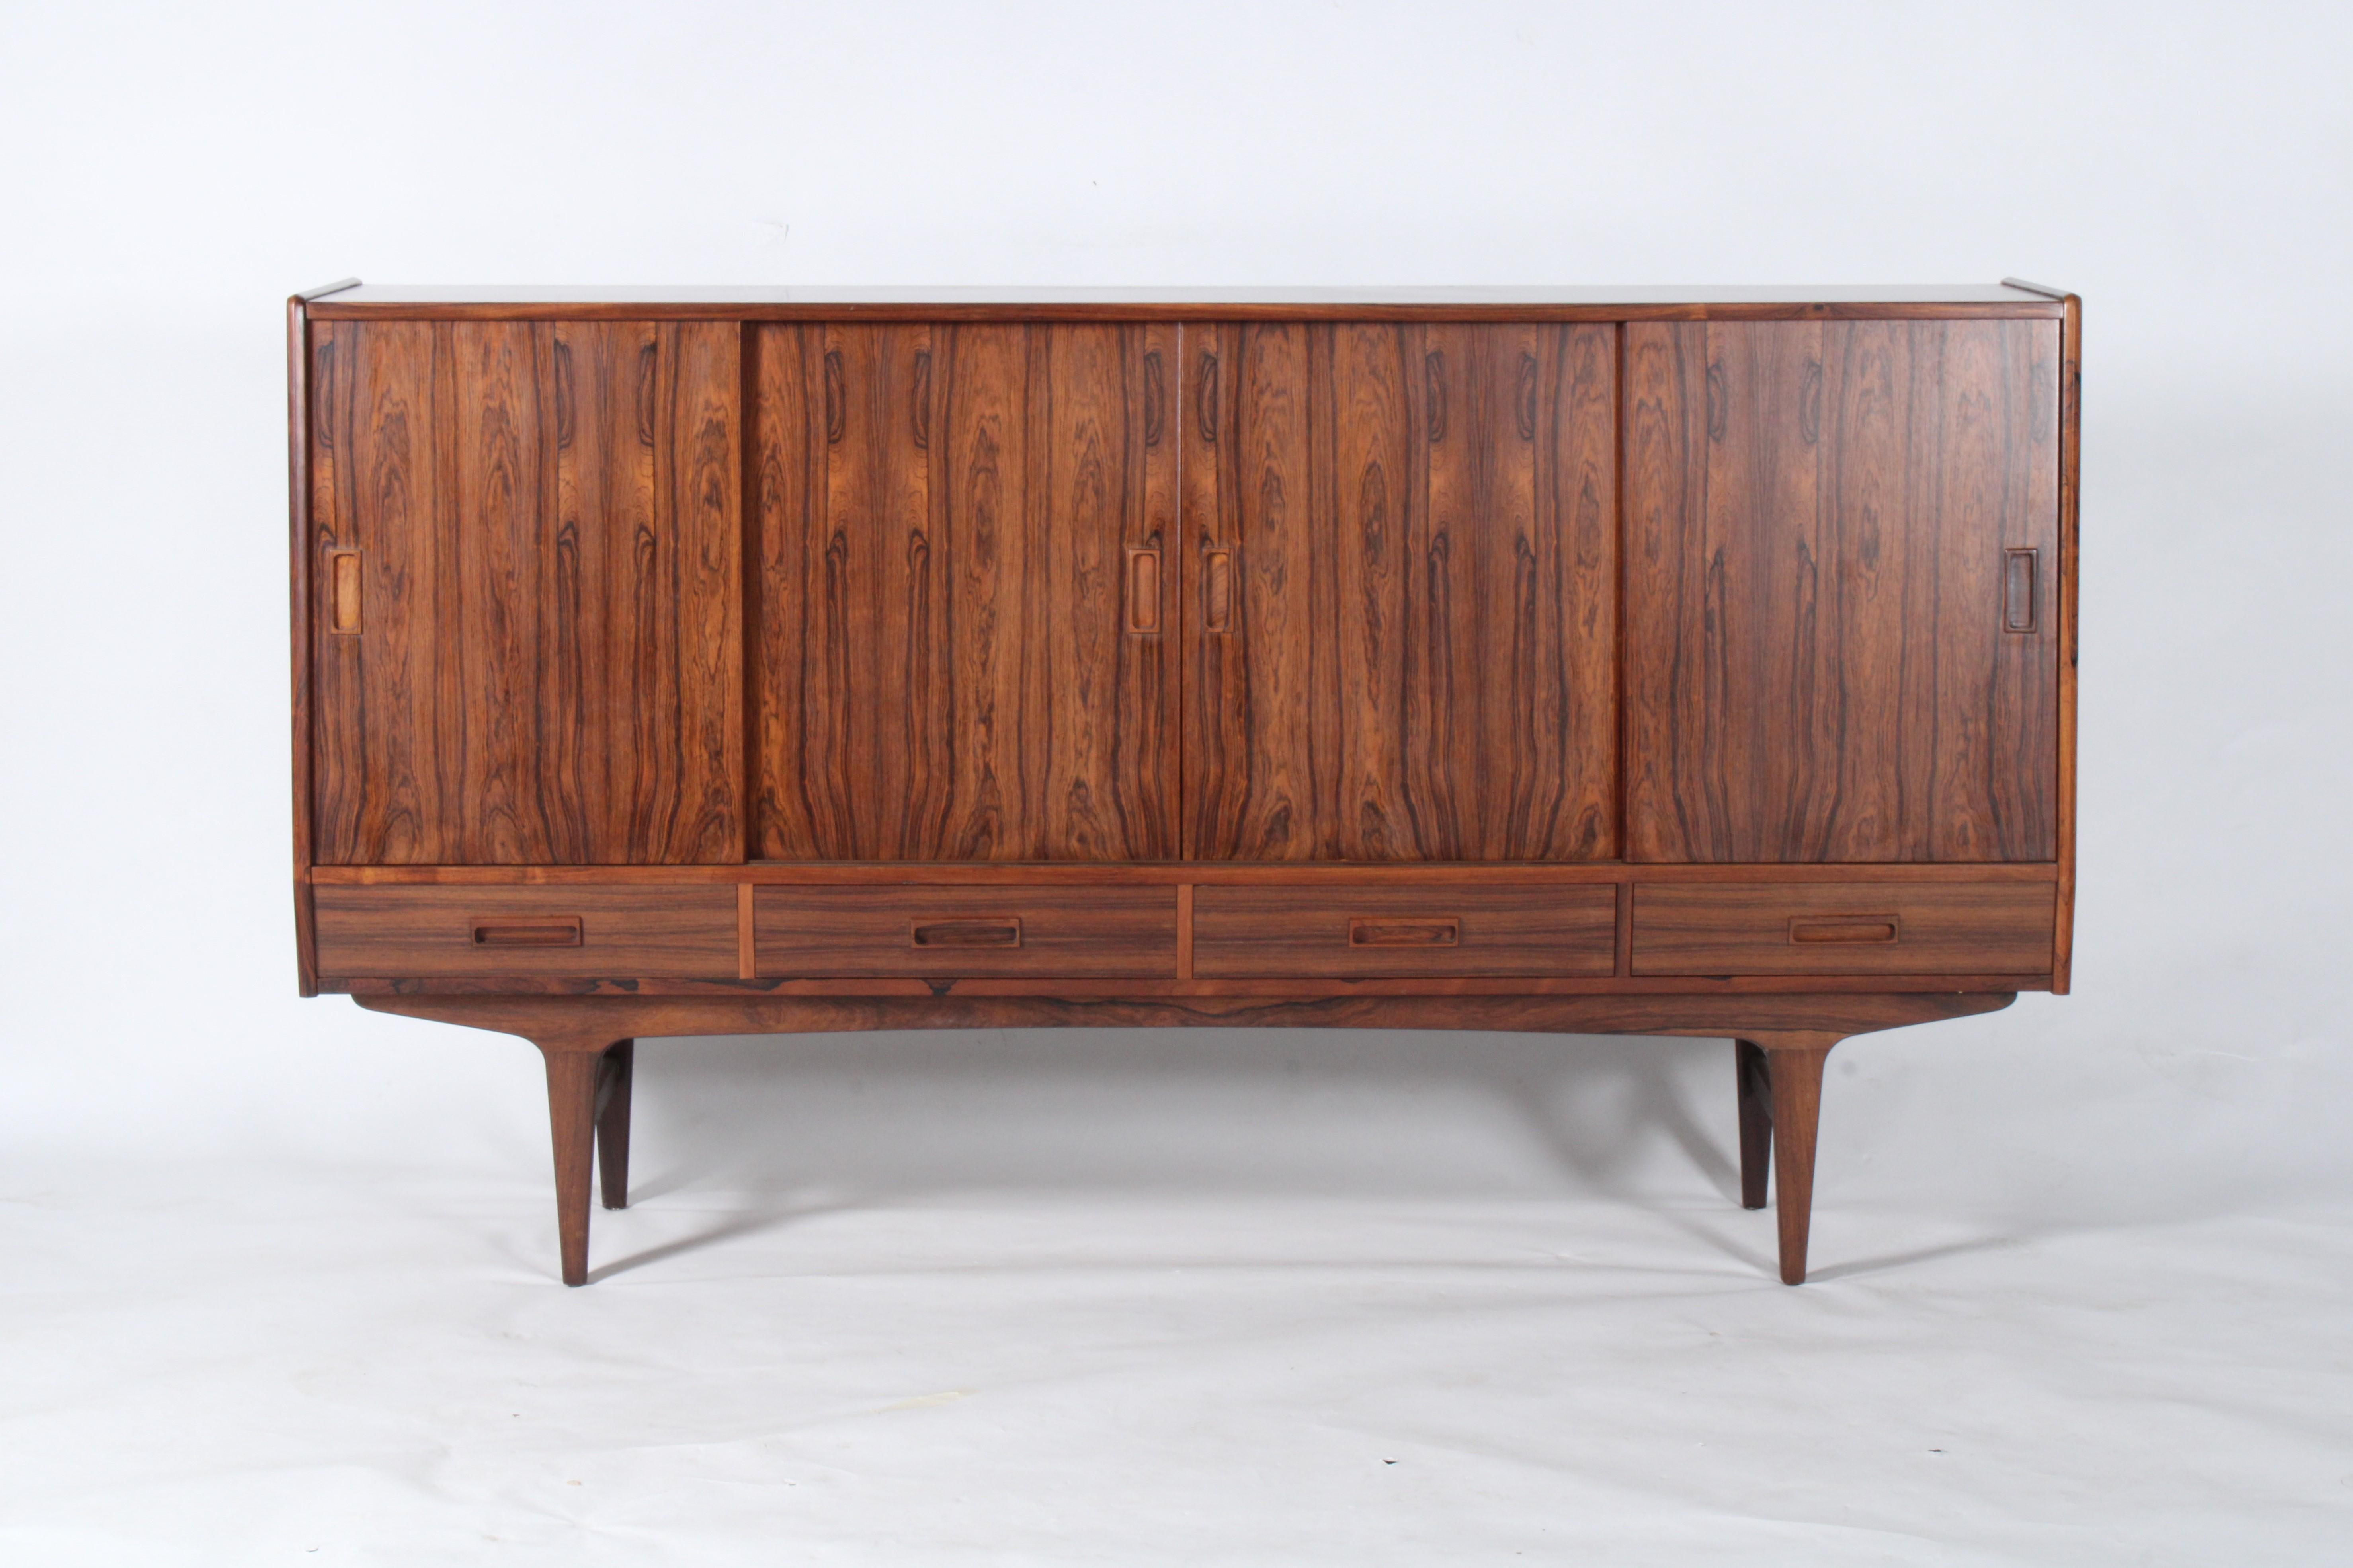 Dating from the 1960’s this stunning piece created in the 1960’s by Borge Seindal for P. Westergaard Mobelfabrik is constructed from the most striking rosewood. It has sliding doors behind which there is ample storage in the form of shelves and